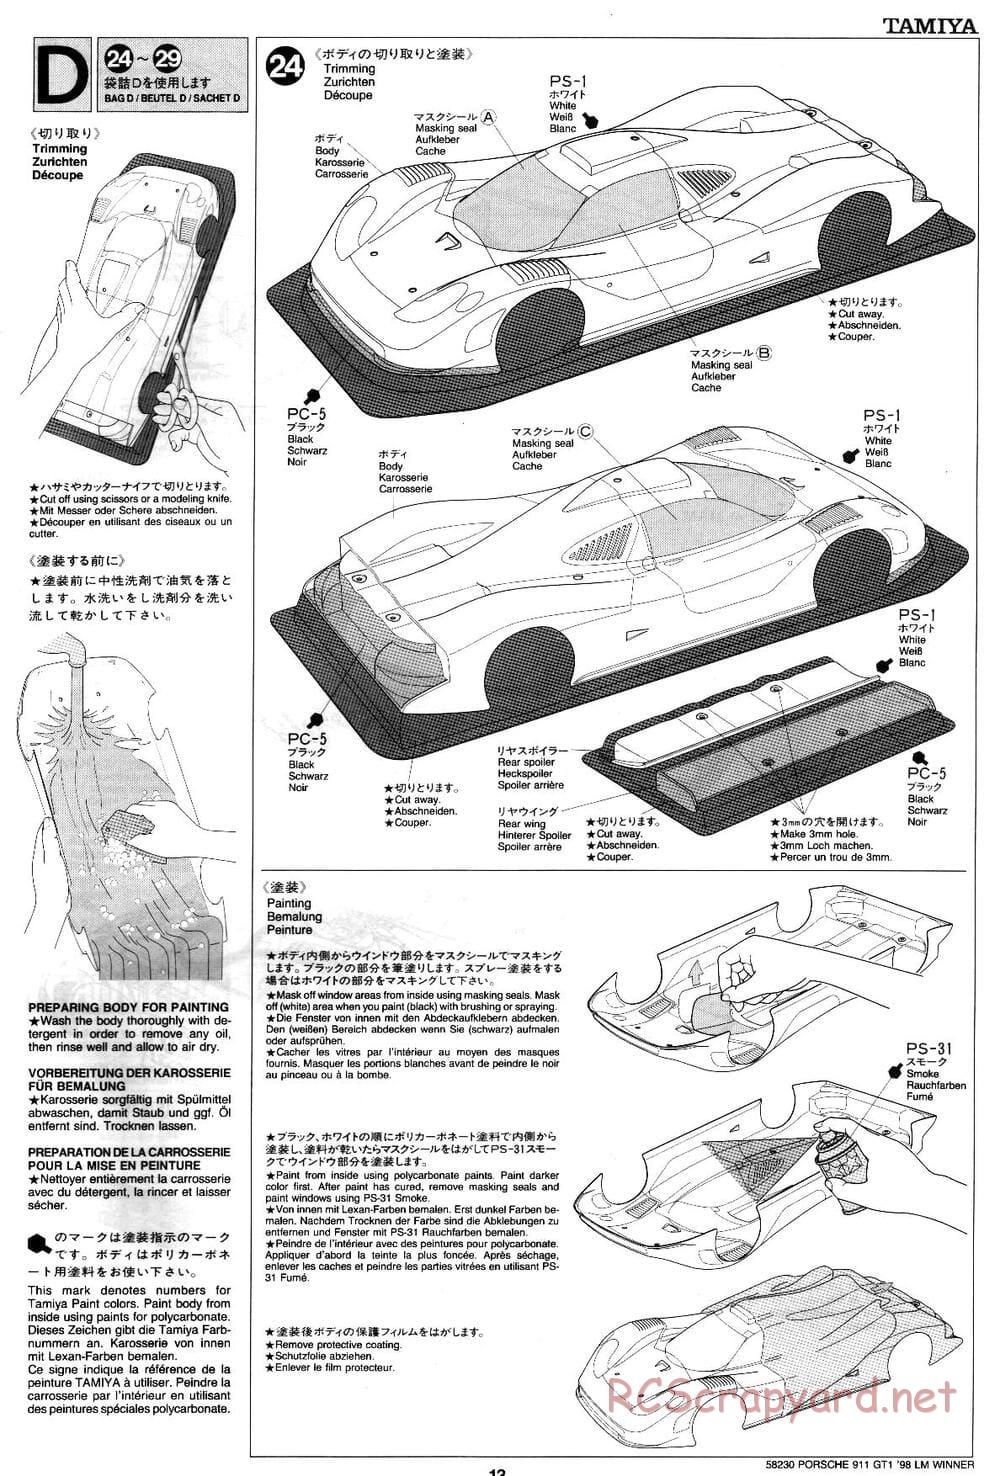 Tamiya - Porsche 911 GT1 98 LM Winner - F103RS Chassis - Manual - Page 13